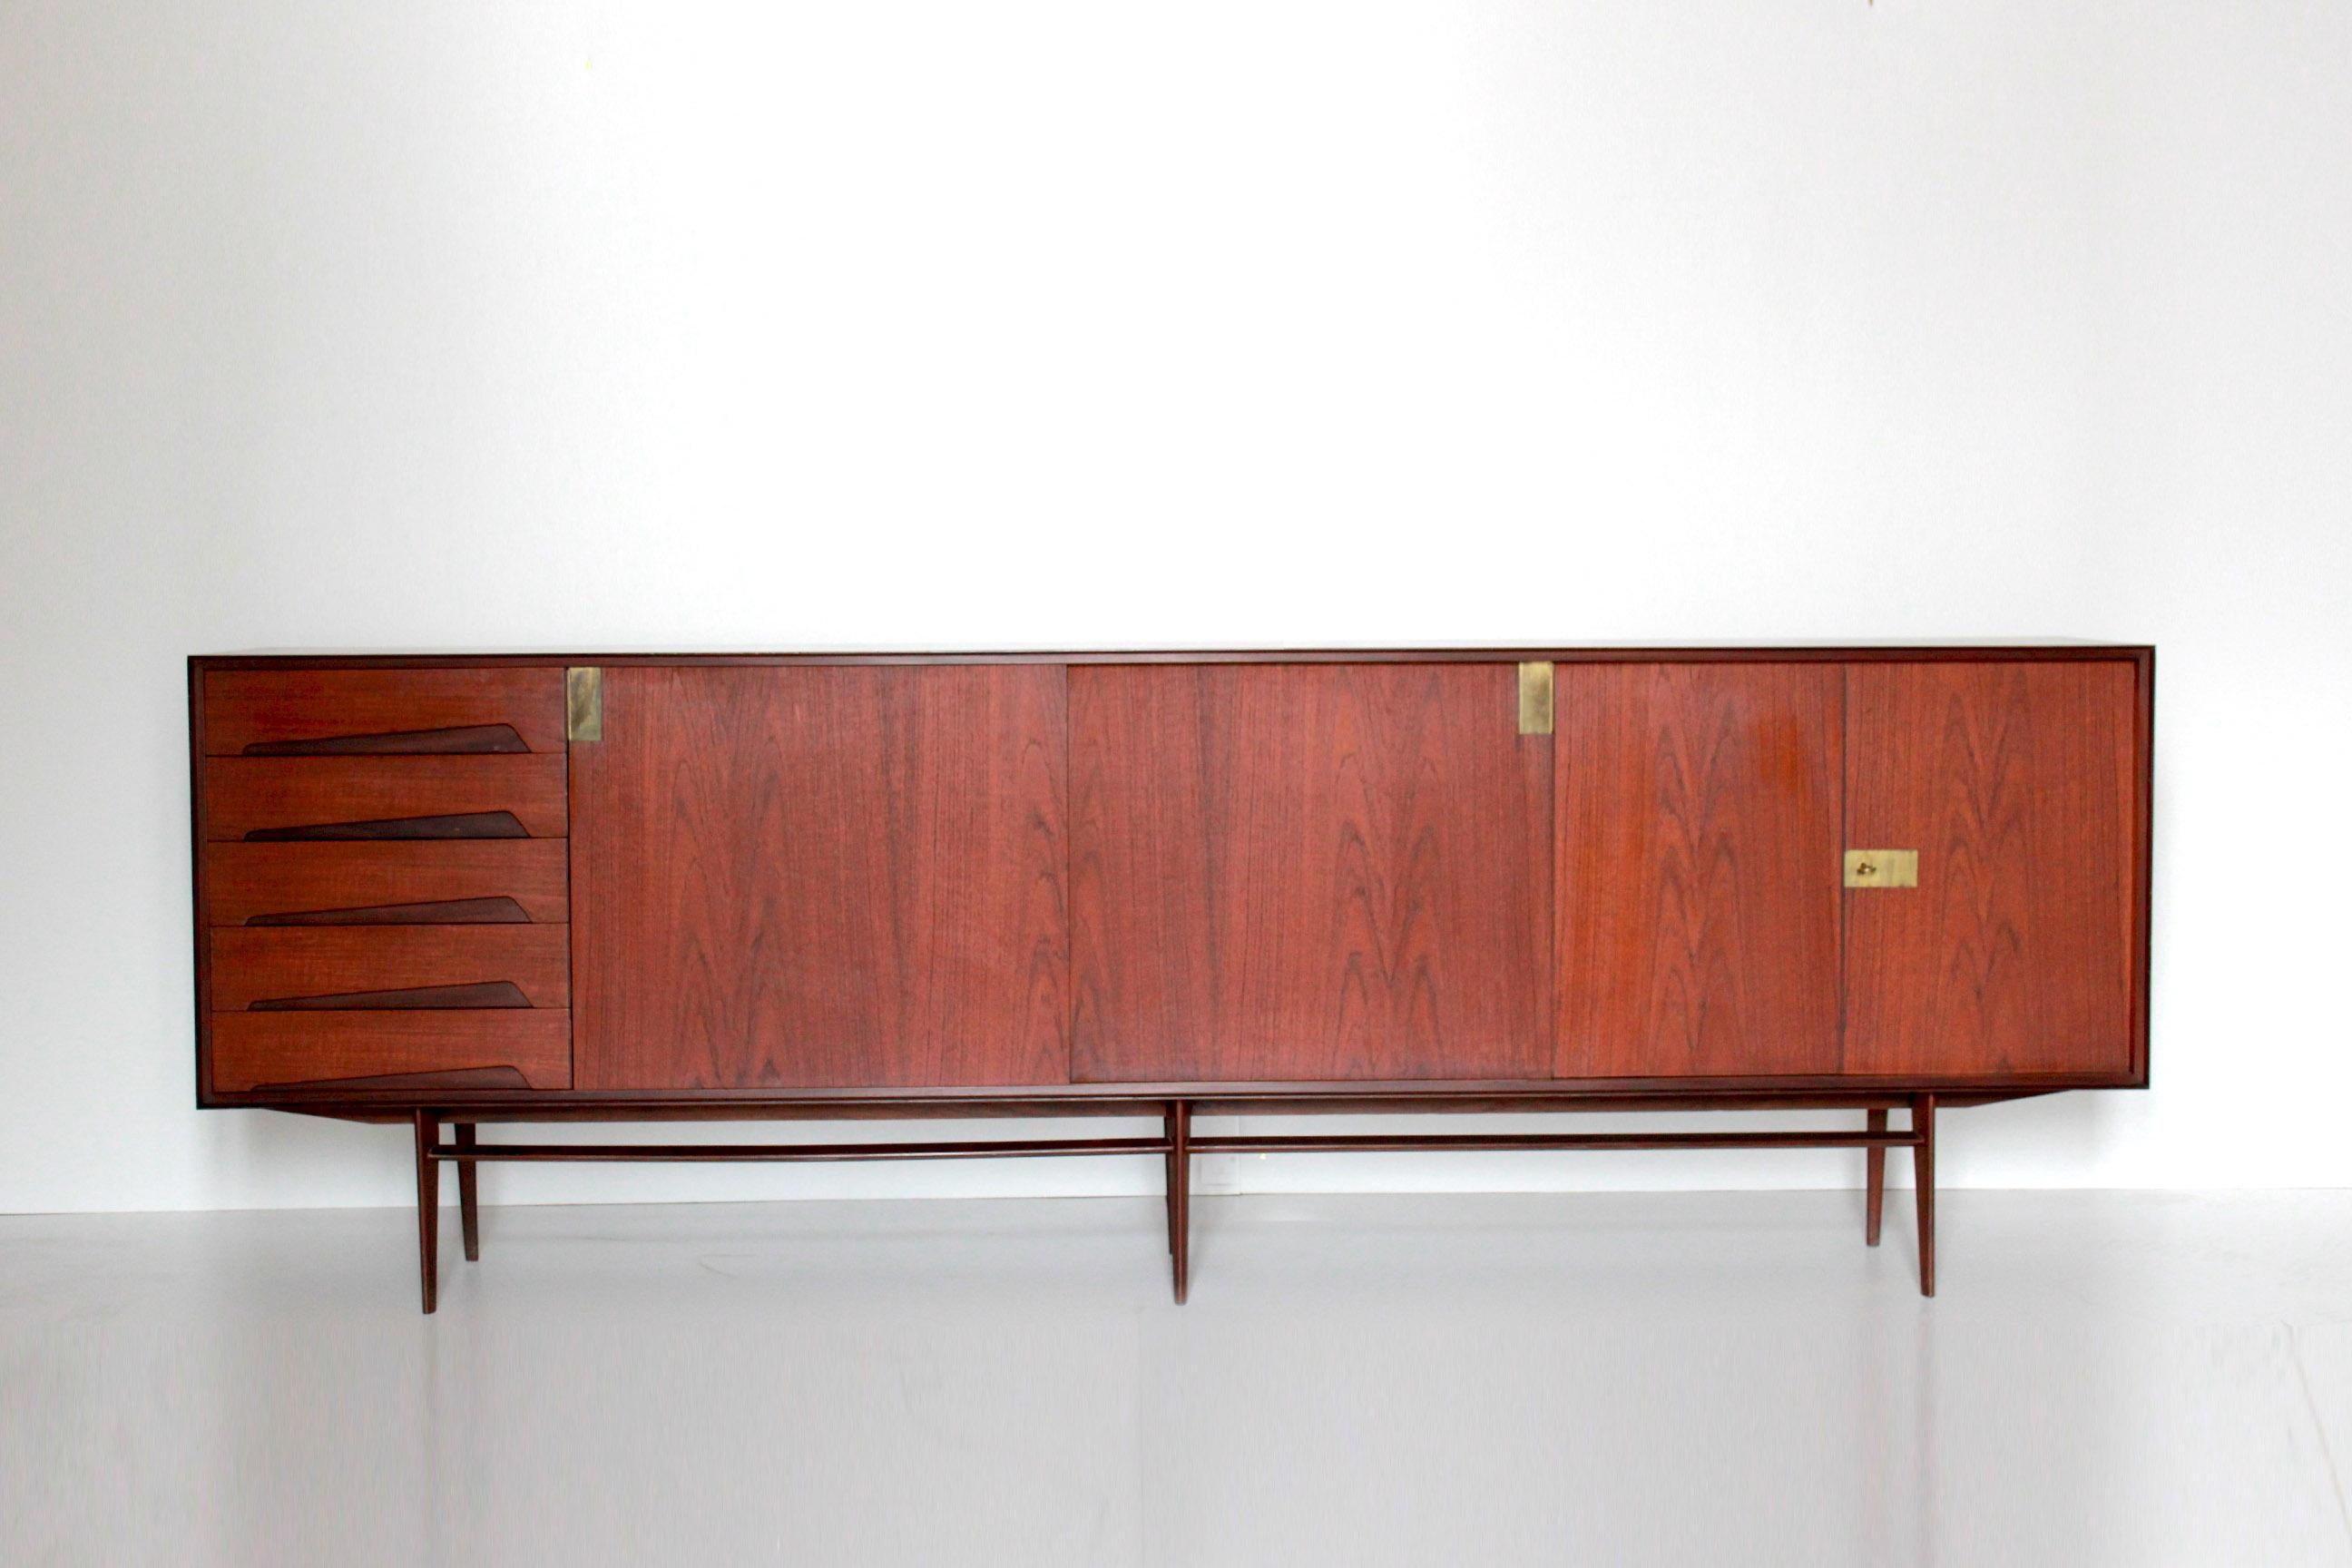 A rare vintage sideboard designed by Edmondo Palutari for italian Iconic manufacturer Vittorio Dassi, 1950s
The items have been fully restored as follows:

Sideboard: wood and brass: Wood has been traited, polished and small damages have been